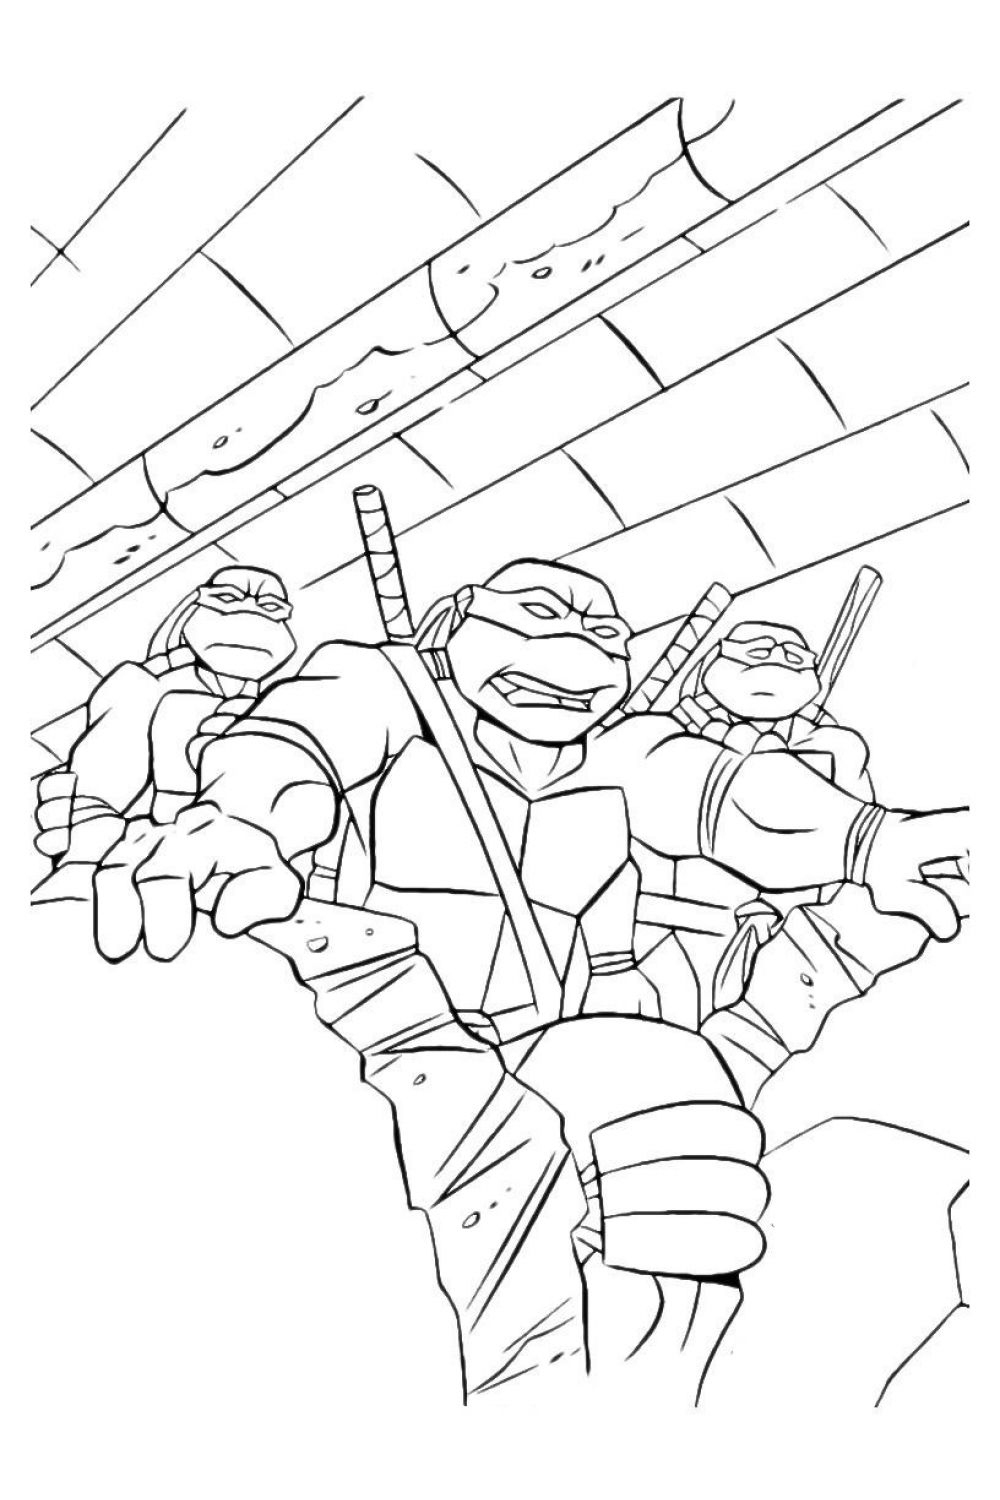 Ninja Turtles Coloring Pages from the cartoon.